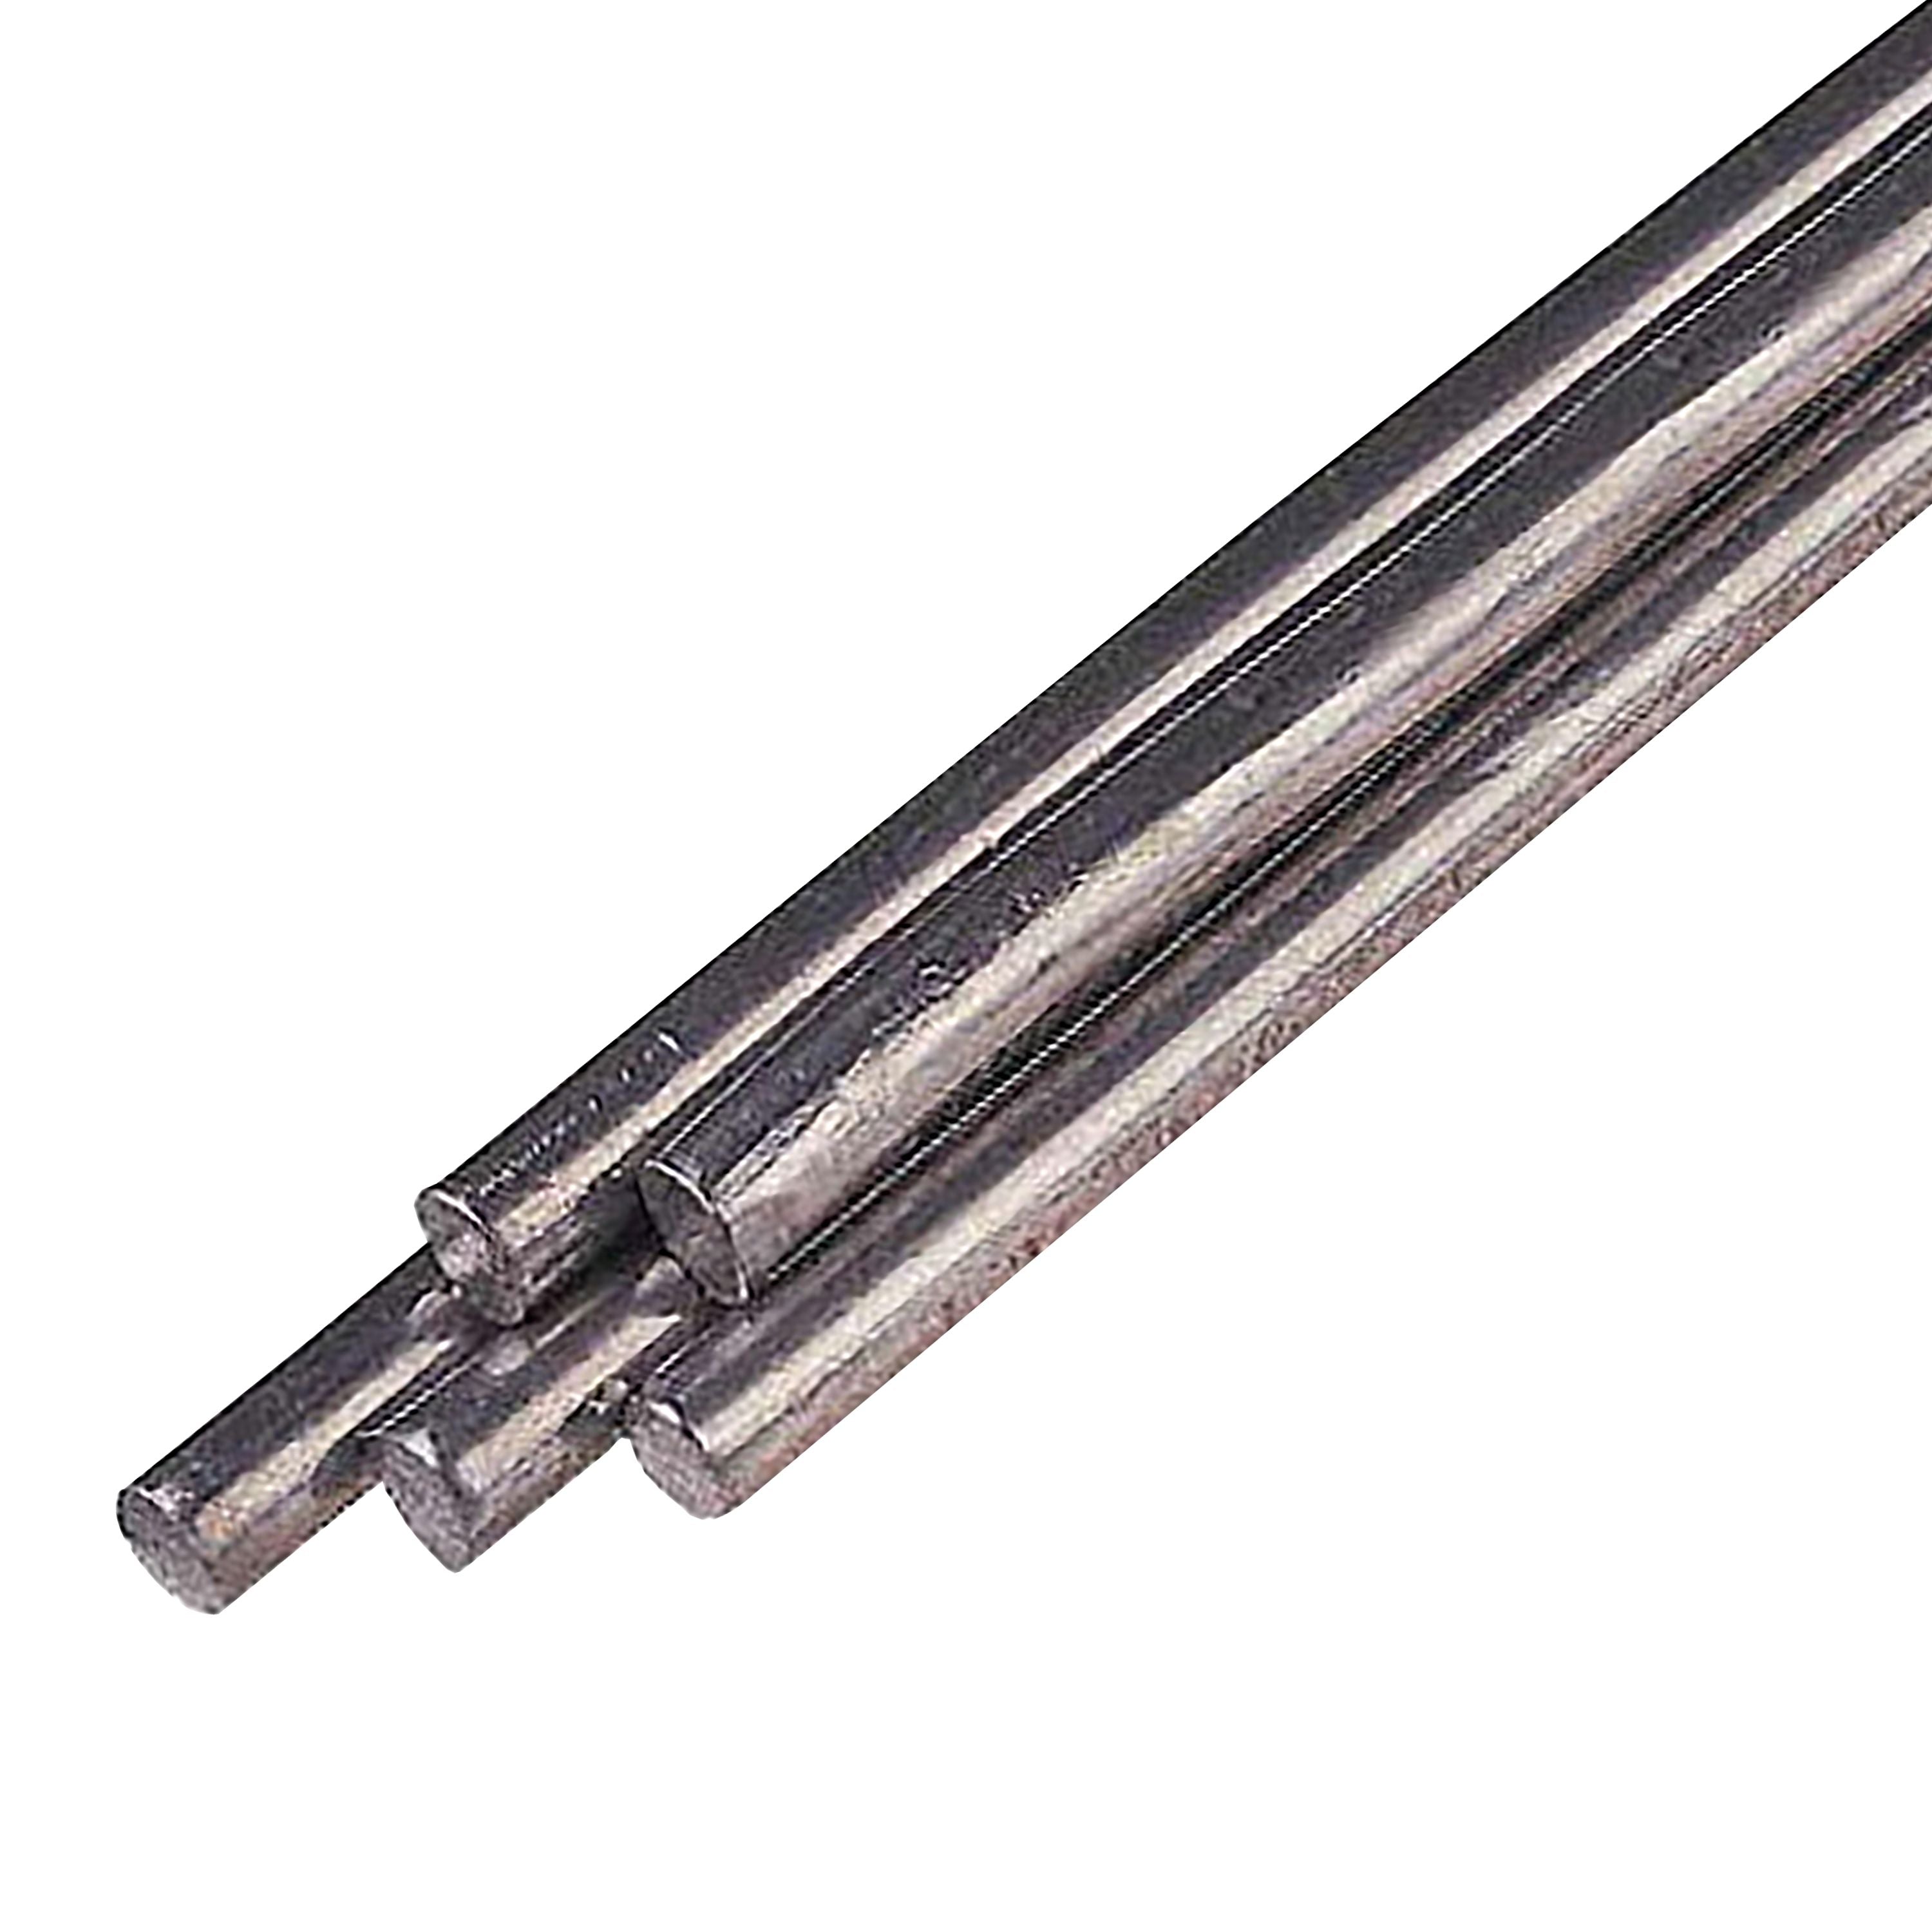 Bromic Solid Core Solder Bars 40/60, 1kg-Gas Tools & Accessories-Tool Factory